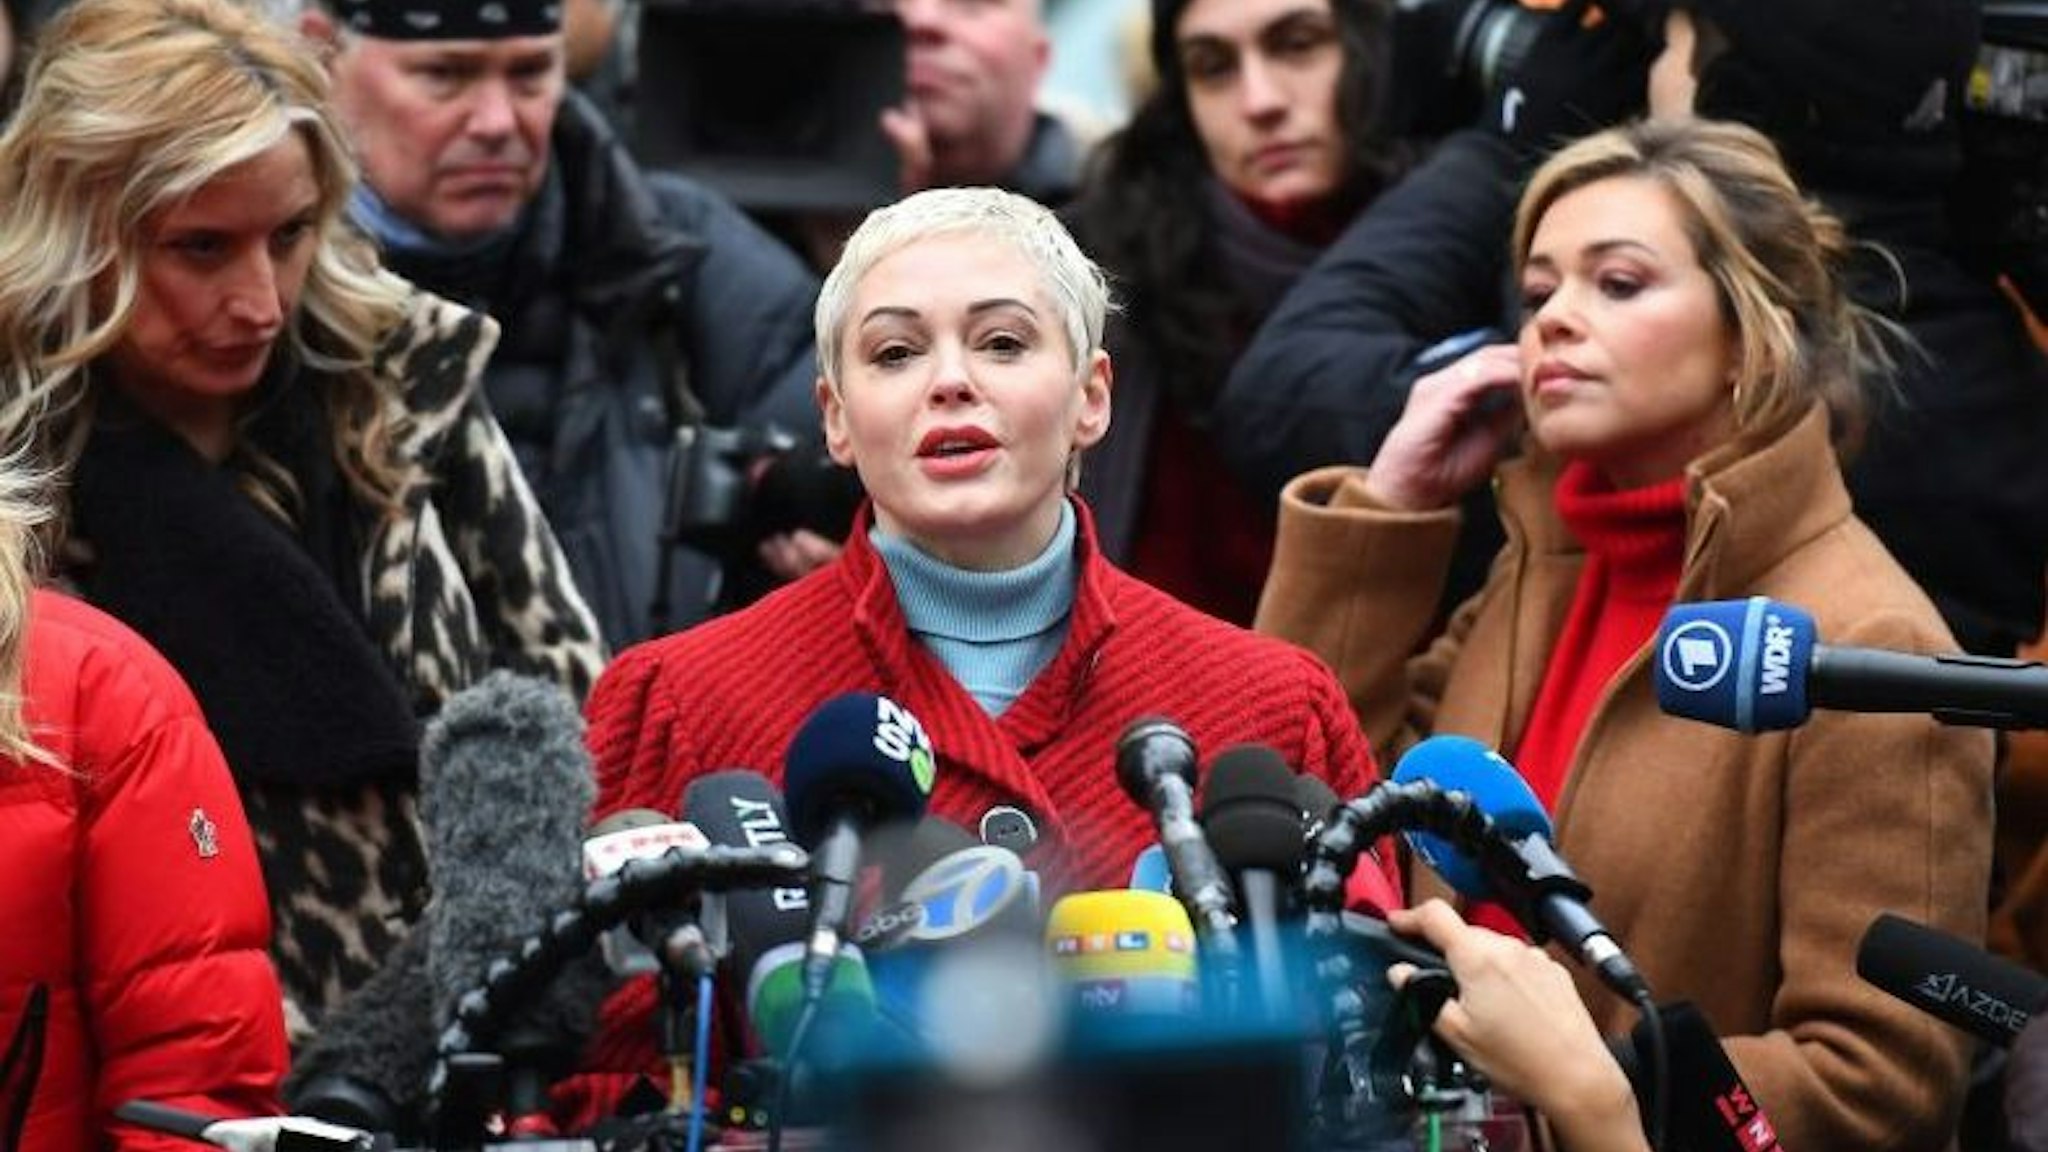 Actress Rose McGowan speaks during a press conference, after Harvey Weinstein arrived at State Supreme Court in Manhattan January 6, 2020 on the first day of his criminal trial on charges of rape and sexual assault in New York City. - Harvey Weinstein's high-profile sex crimes trial opens on Monday, more than two years after a slew of allegations against the once-mighty Hollywood producer triggered the #MeToo movement that led to the downfall of dozens of powerful men. The disgraced movie mogul faces life in prison if convicted in a New York state court of predatory sexual assault charges, in a trial expected to last six weeks.